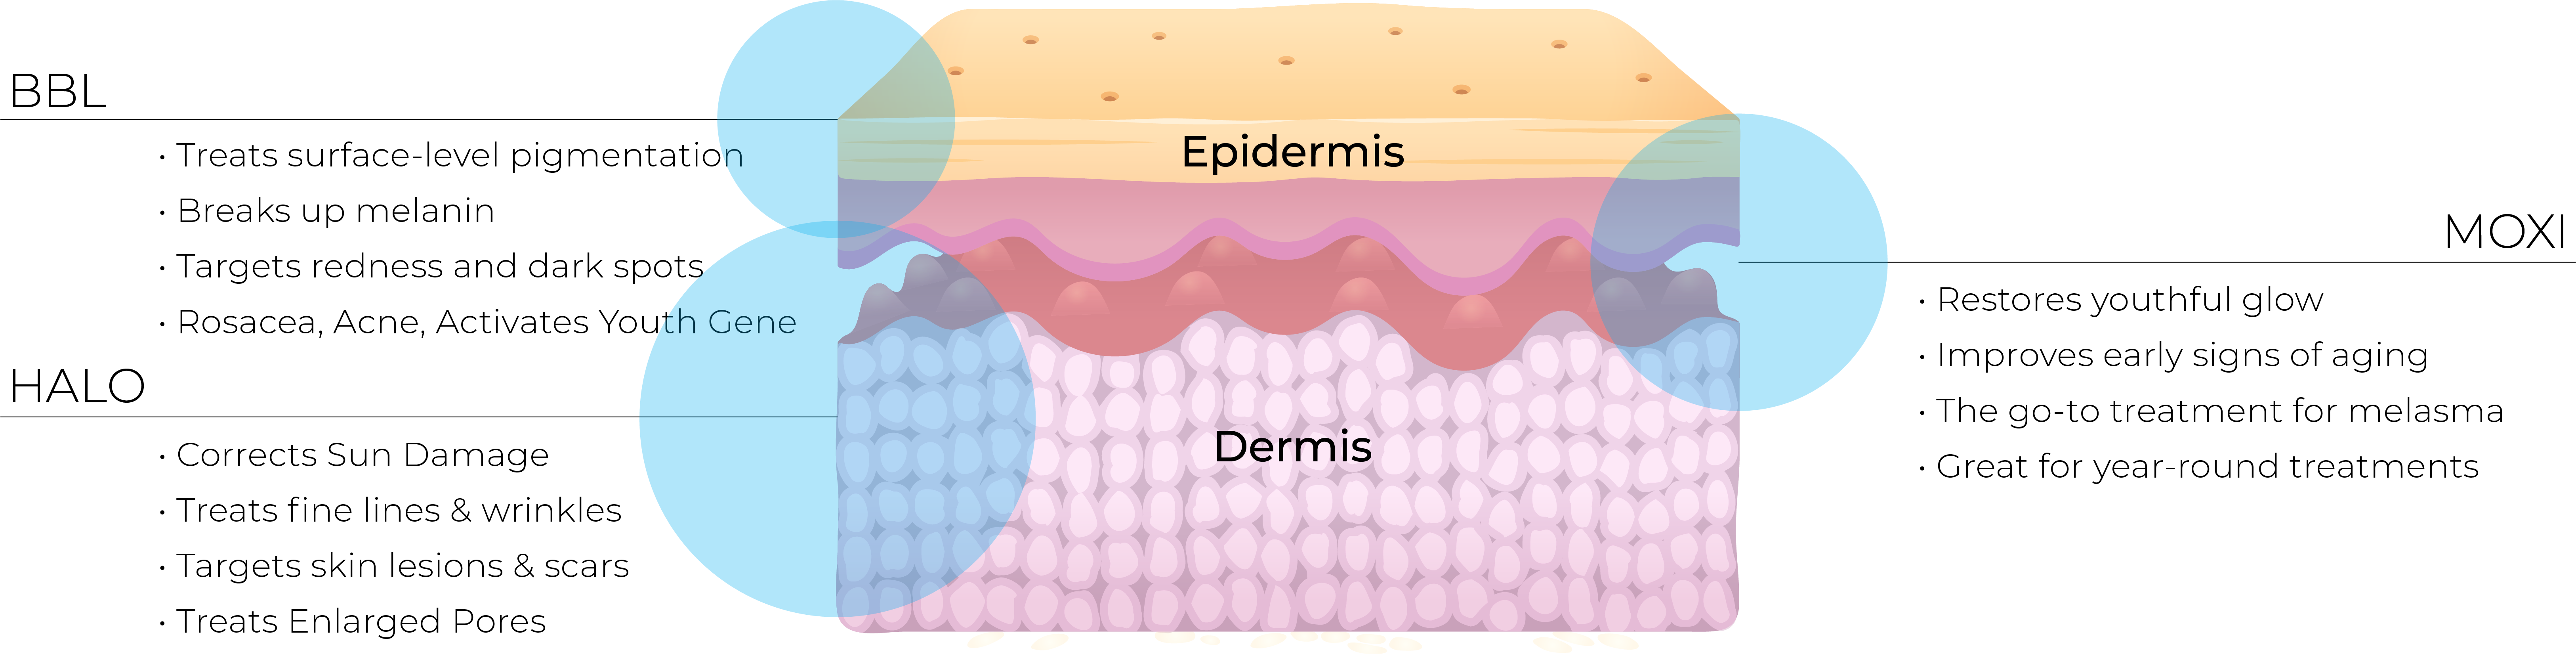 Infographic showing the layers of skin Moxi Halo BBL lasers